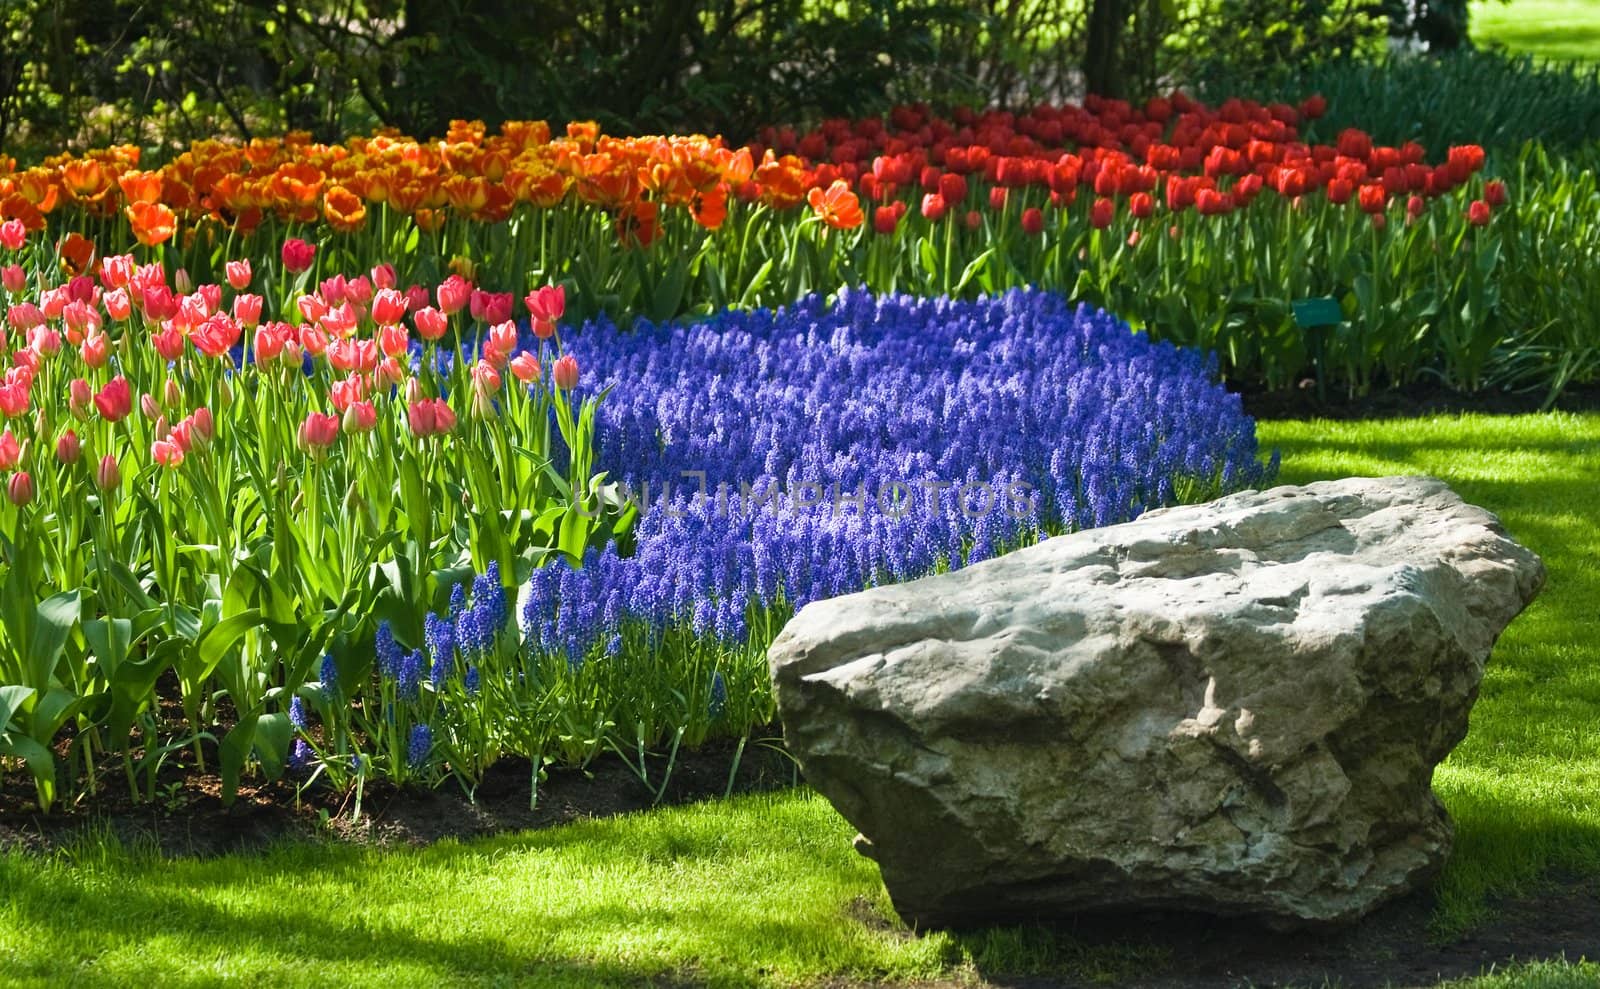 Spring time in park with blooming tulips and common grape hyacinth